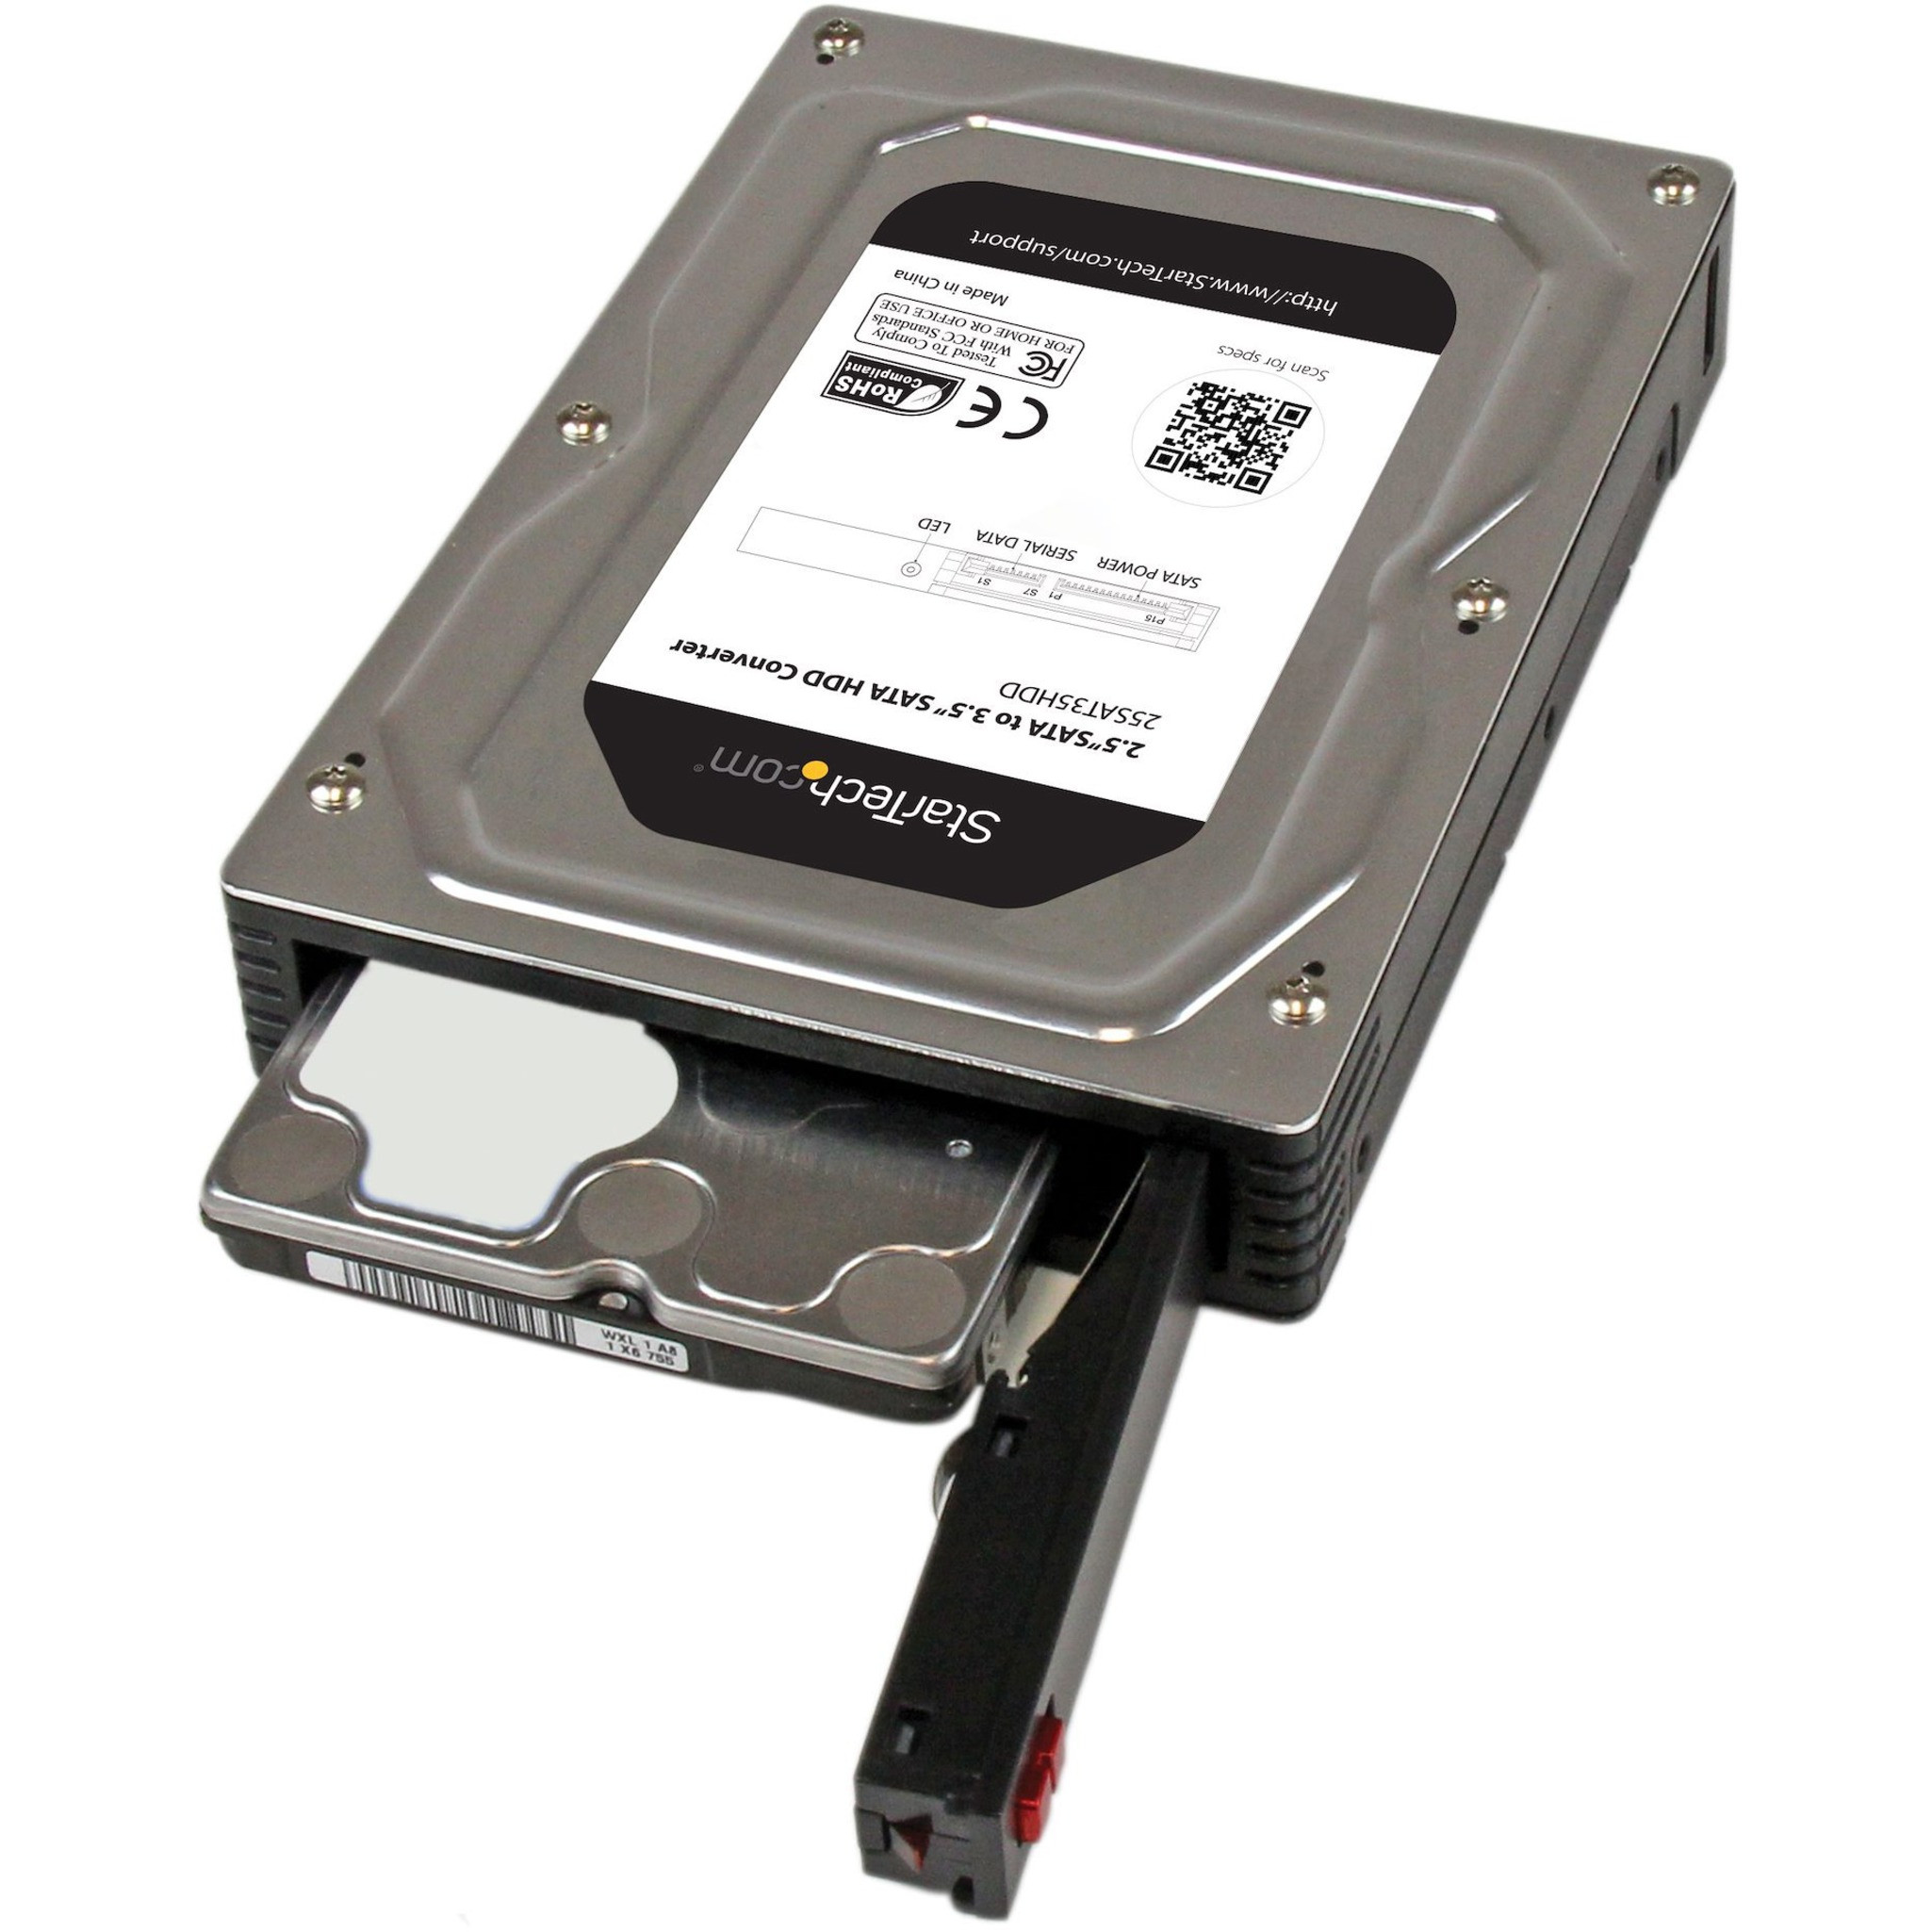 .com 2.5" to 3.5" SATA Aluminum Hard Drive Adapter Enclosure SSD / Height up to 12.5mmTurn a 2.5" SATA HDD/SSD into a 3.5... 25SAT35HDD - Corporate Armor